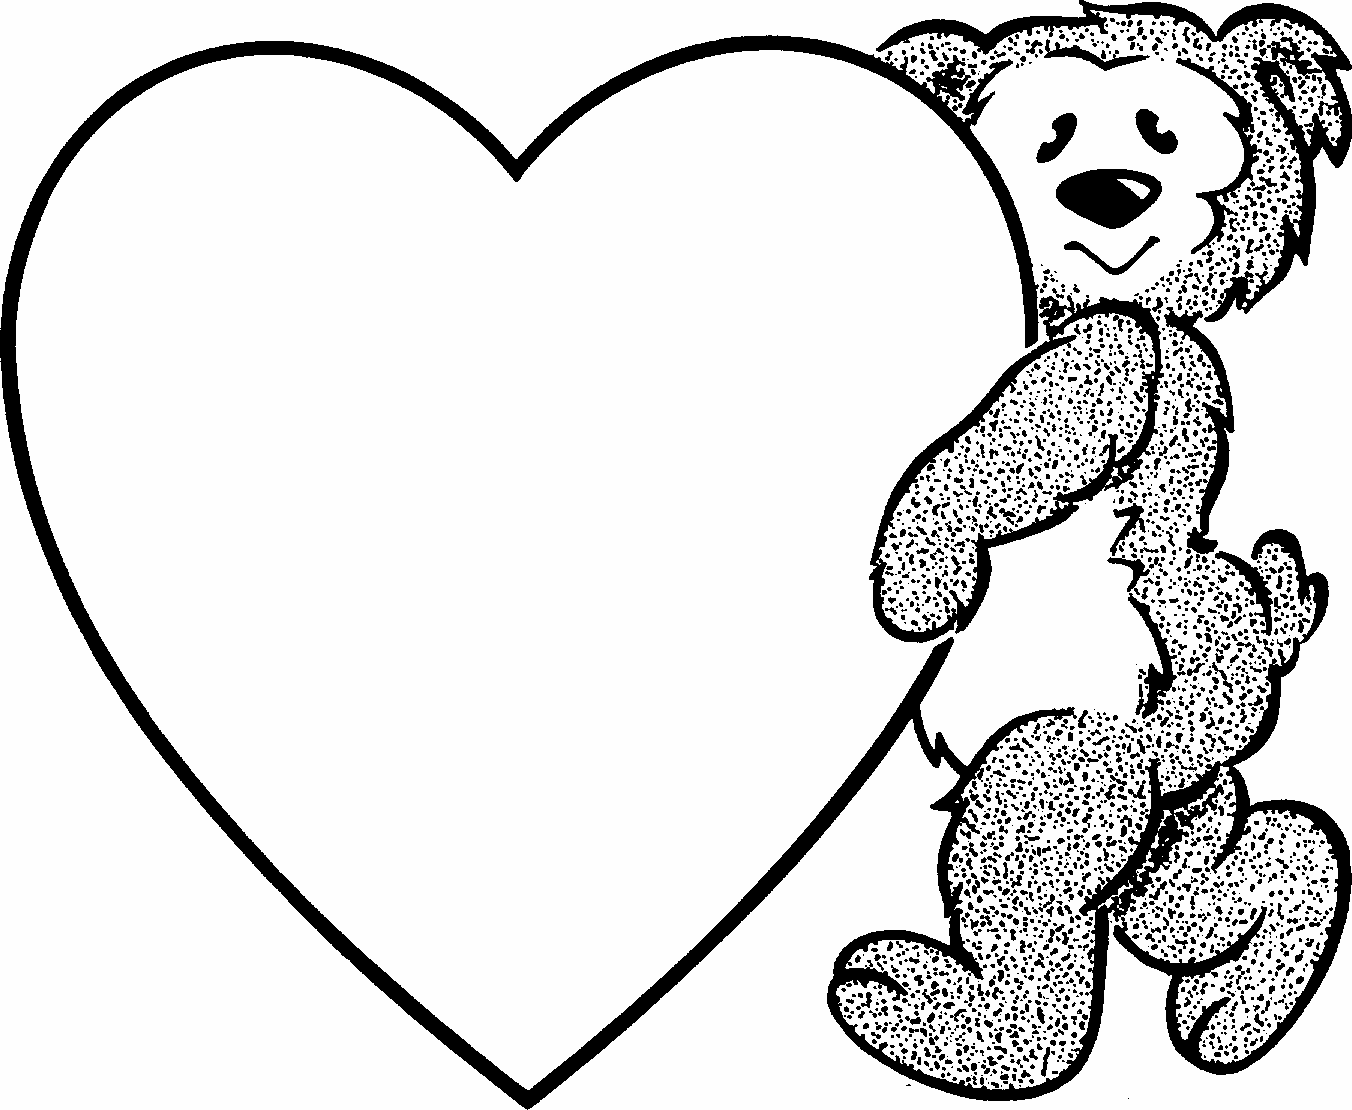 Valentines Coloring Pages For Kids Archives - Coloring Page For Kids